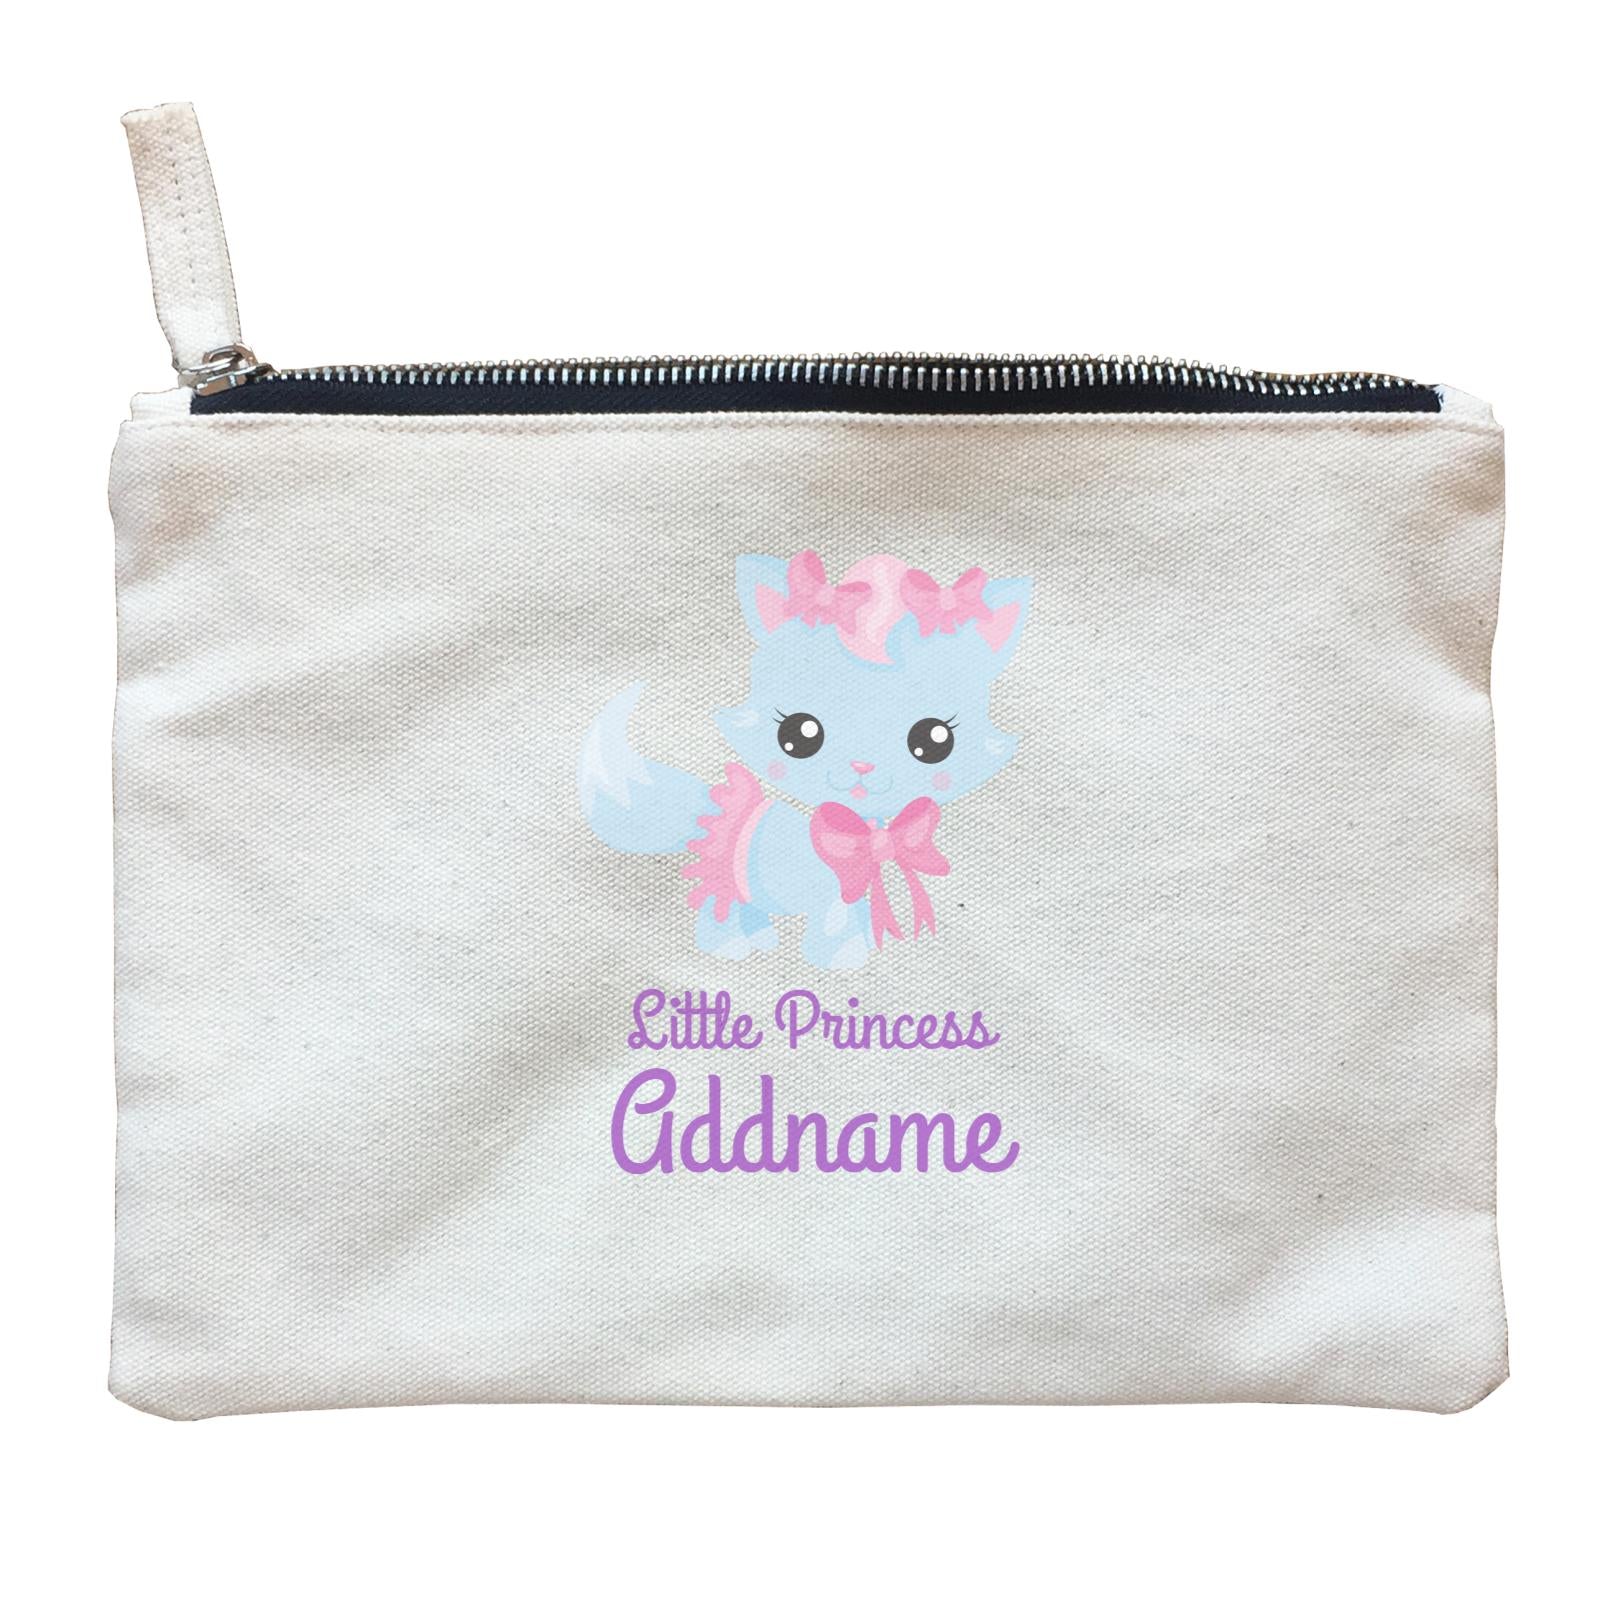 Little Princess Pets Blue Cat with Pink Ribbons Addname Zipper Pouch